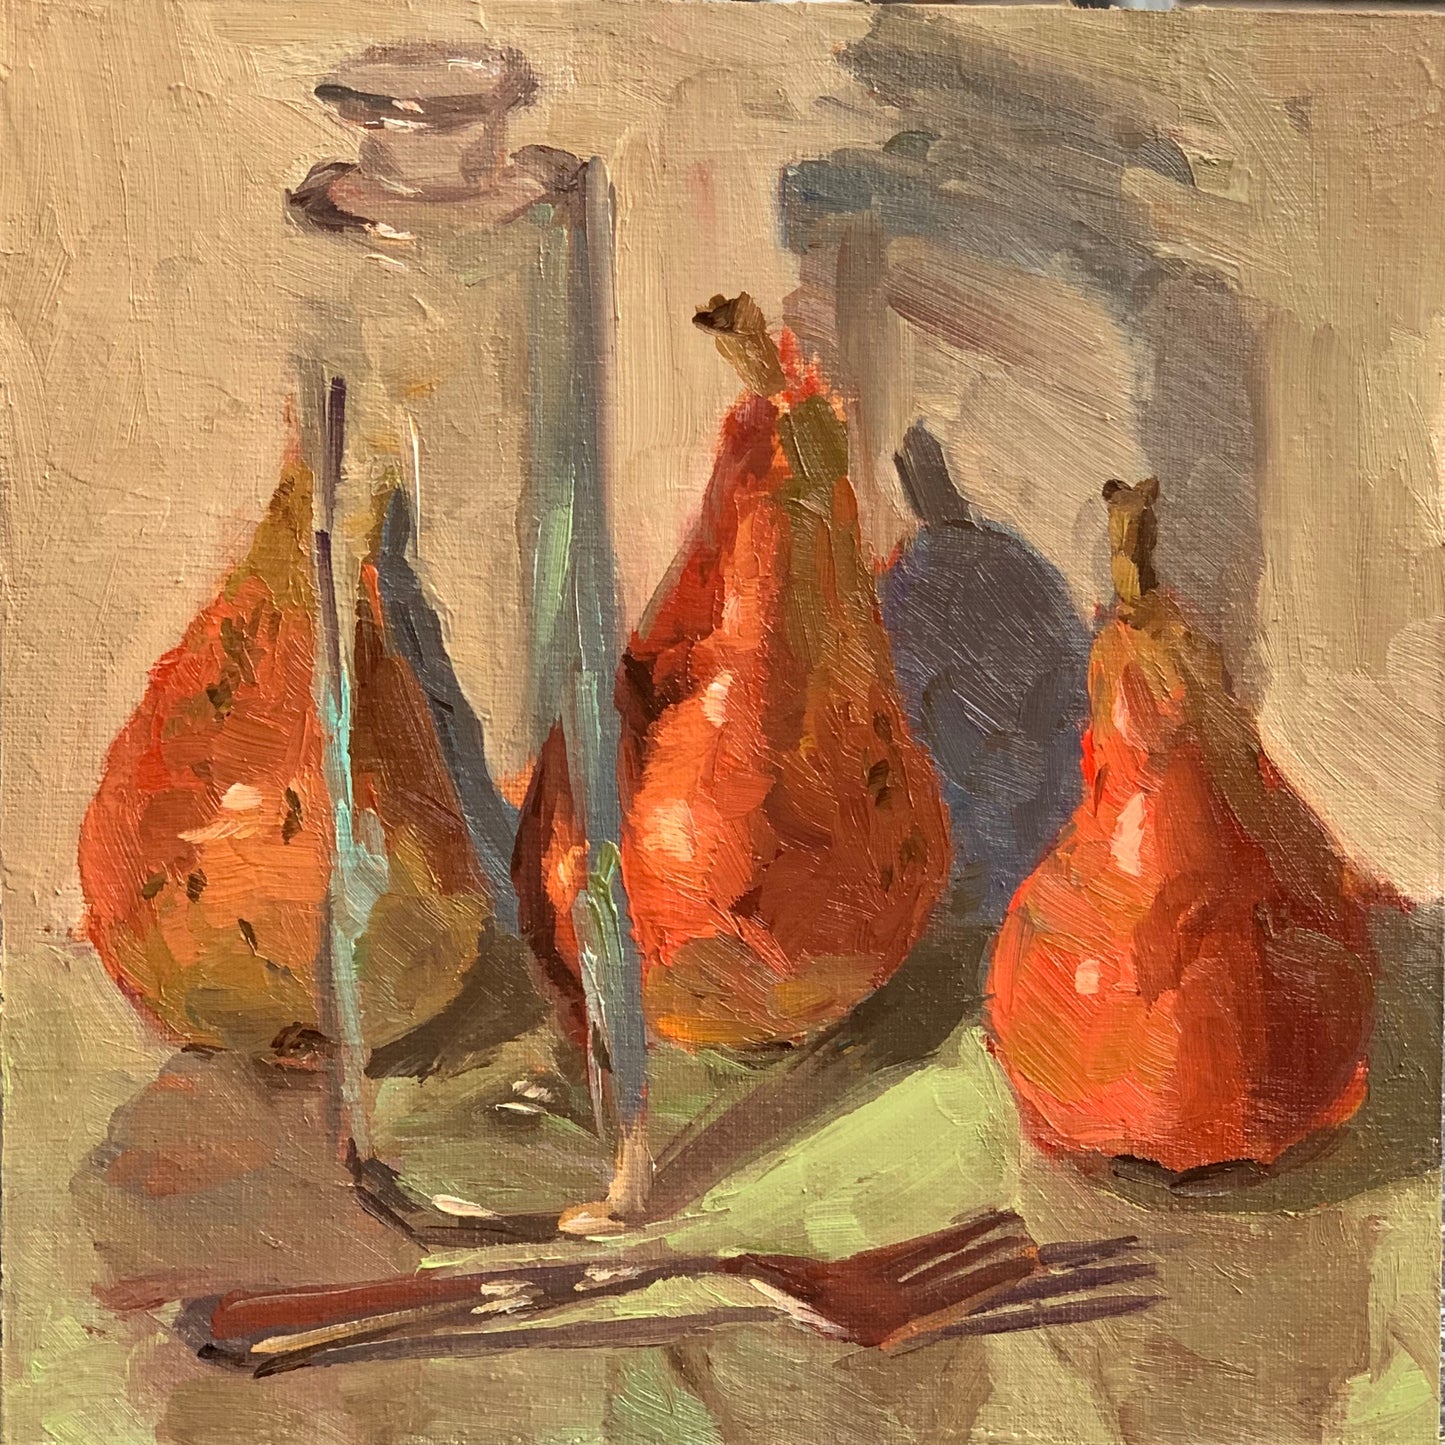 Red Pears and Glass - Original Oil Painting